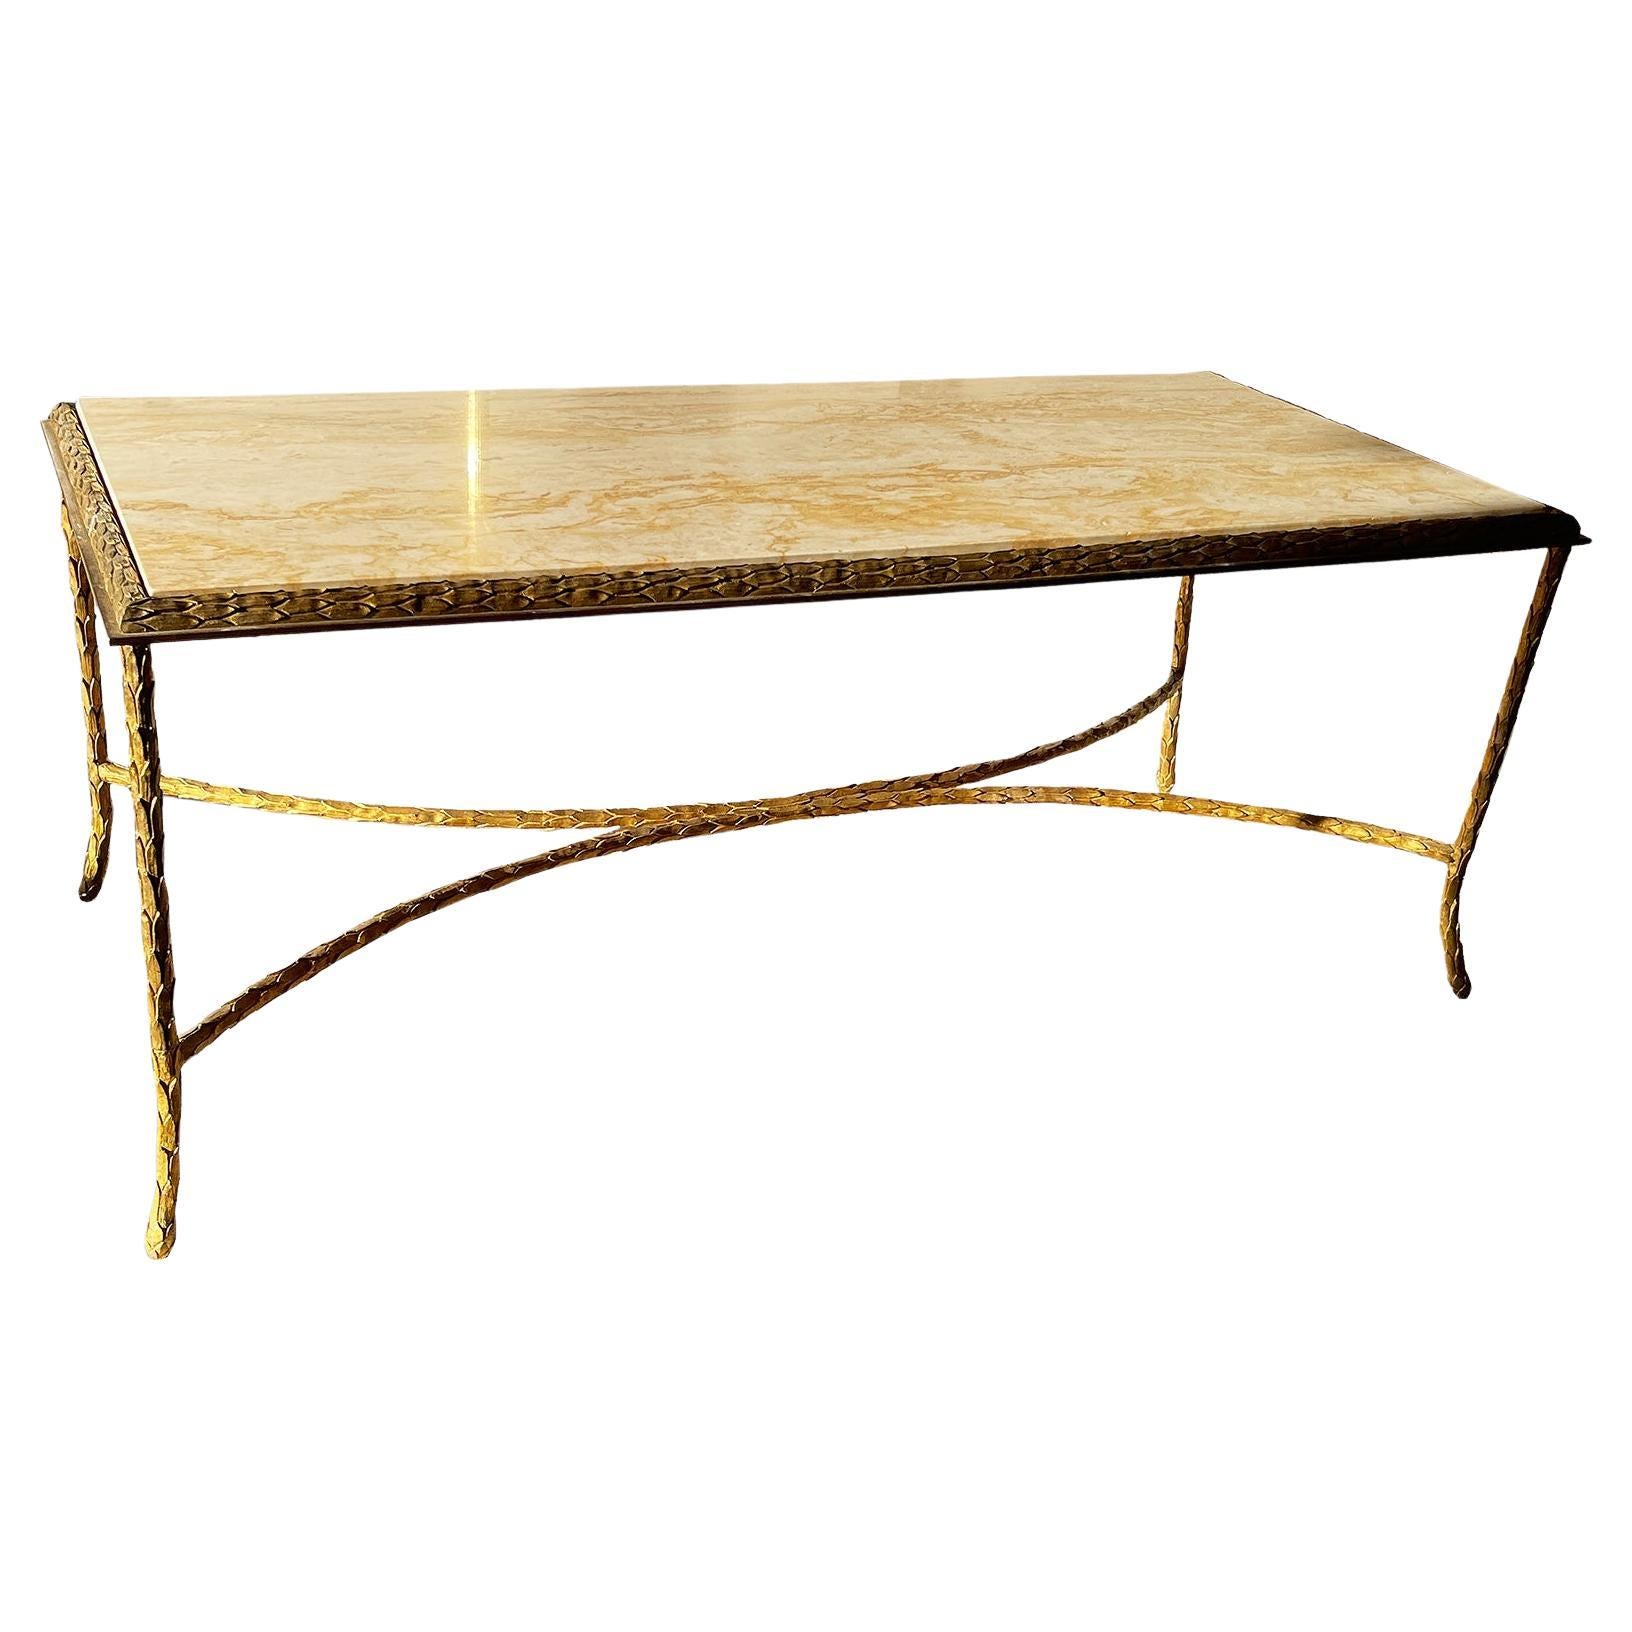 Maison Charles Coffee Table in Bronze with a Travertine Top, 1950